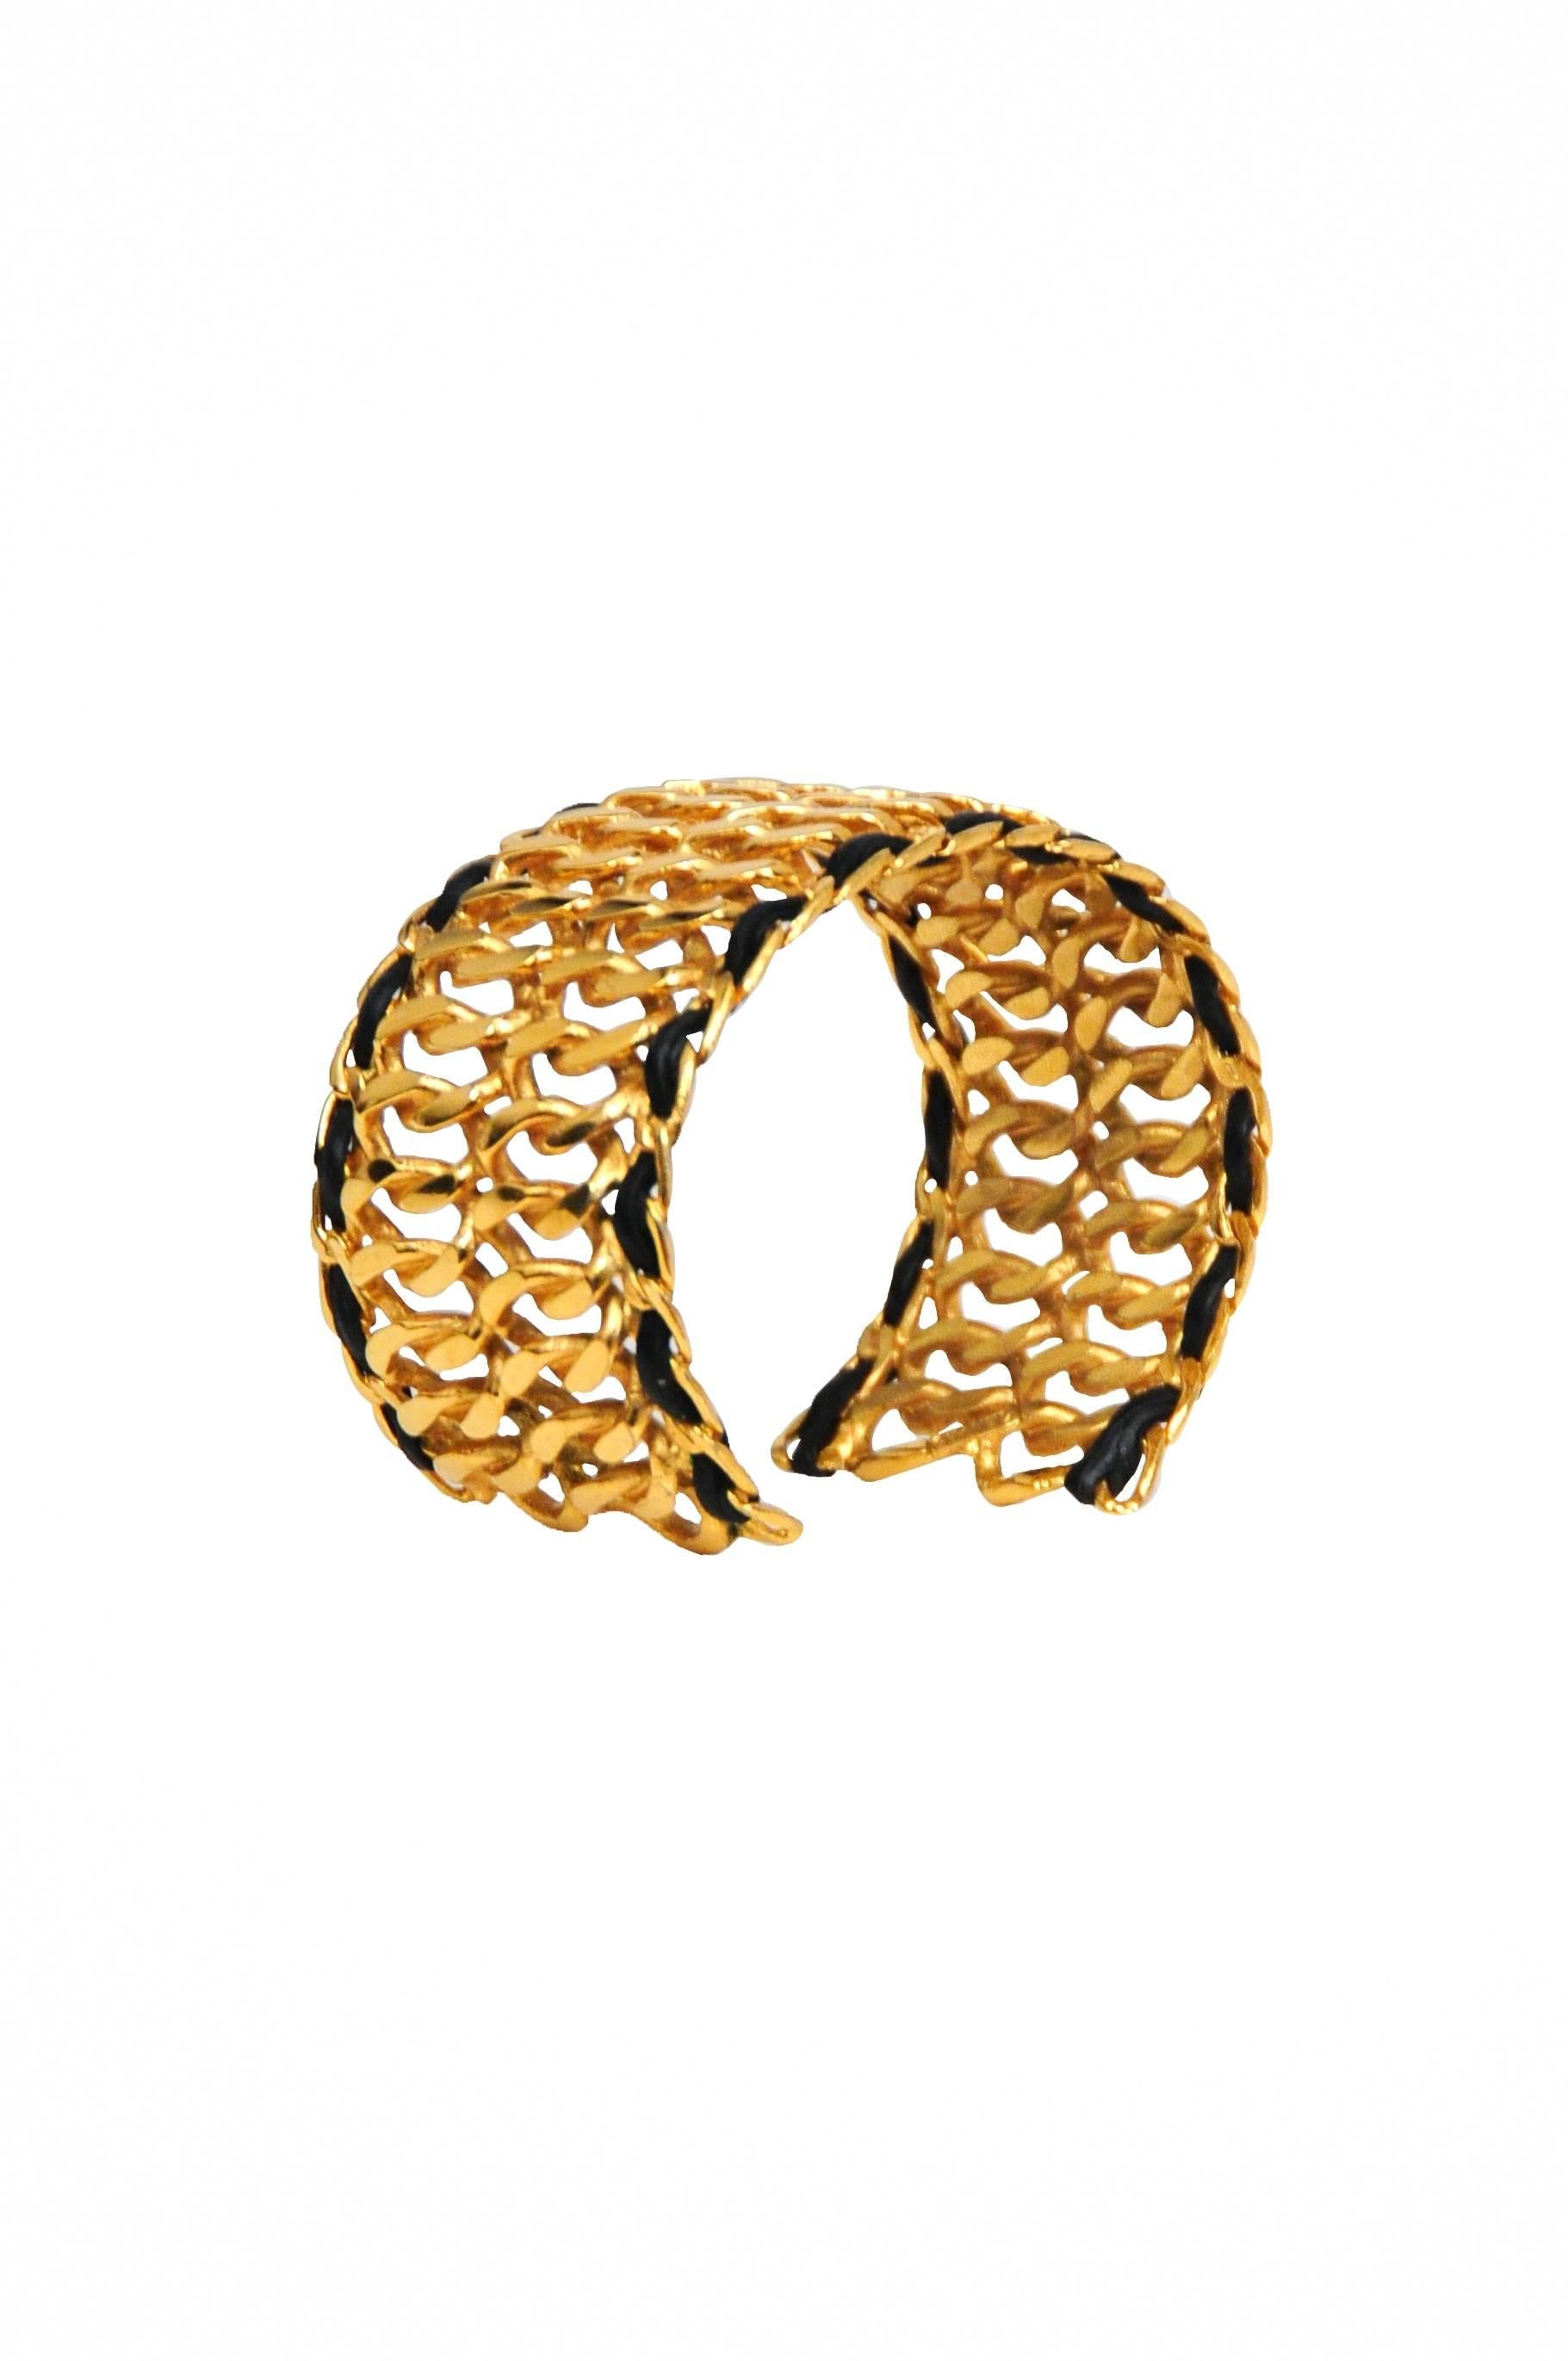 Vintage Chanel gold tone double chain cuff featuring woven black leather along the edges.